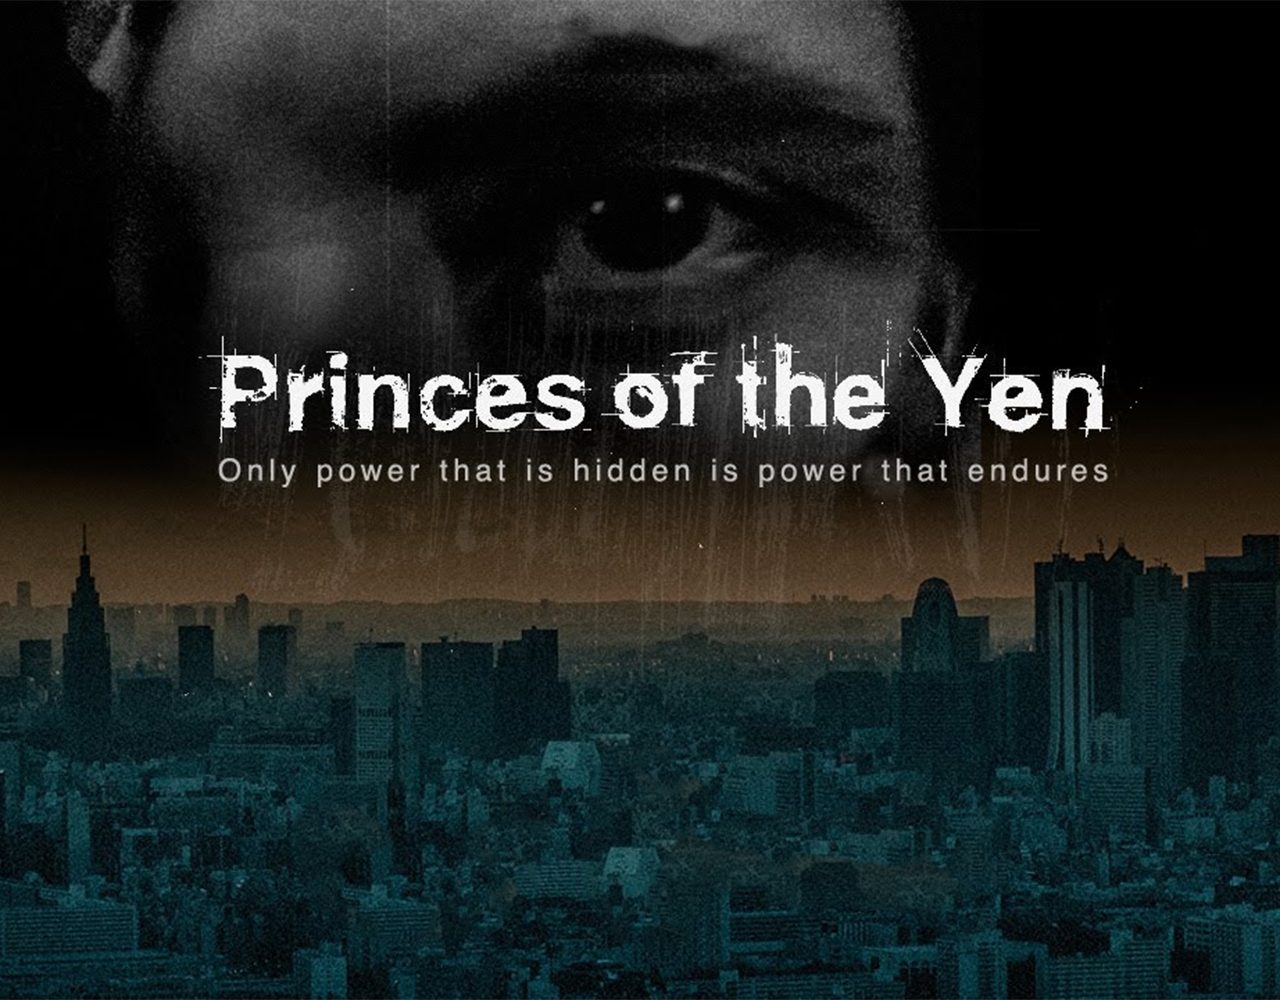 Book Review: Princes of the Yen